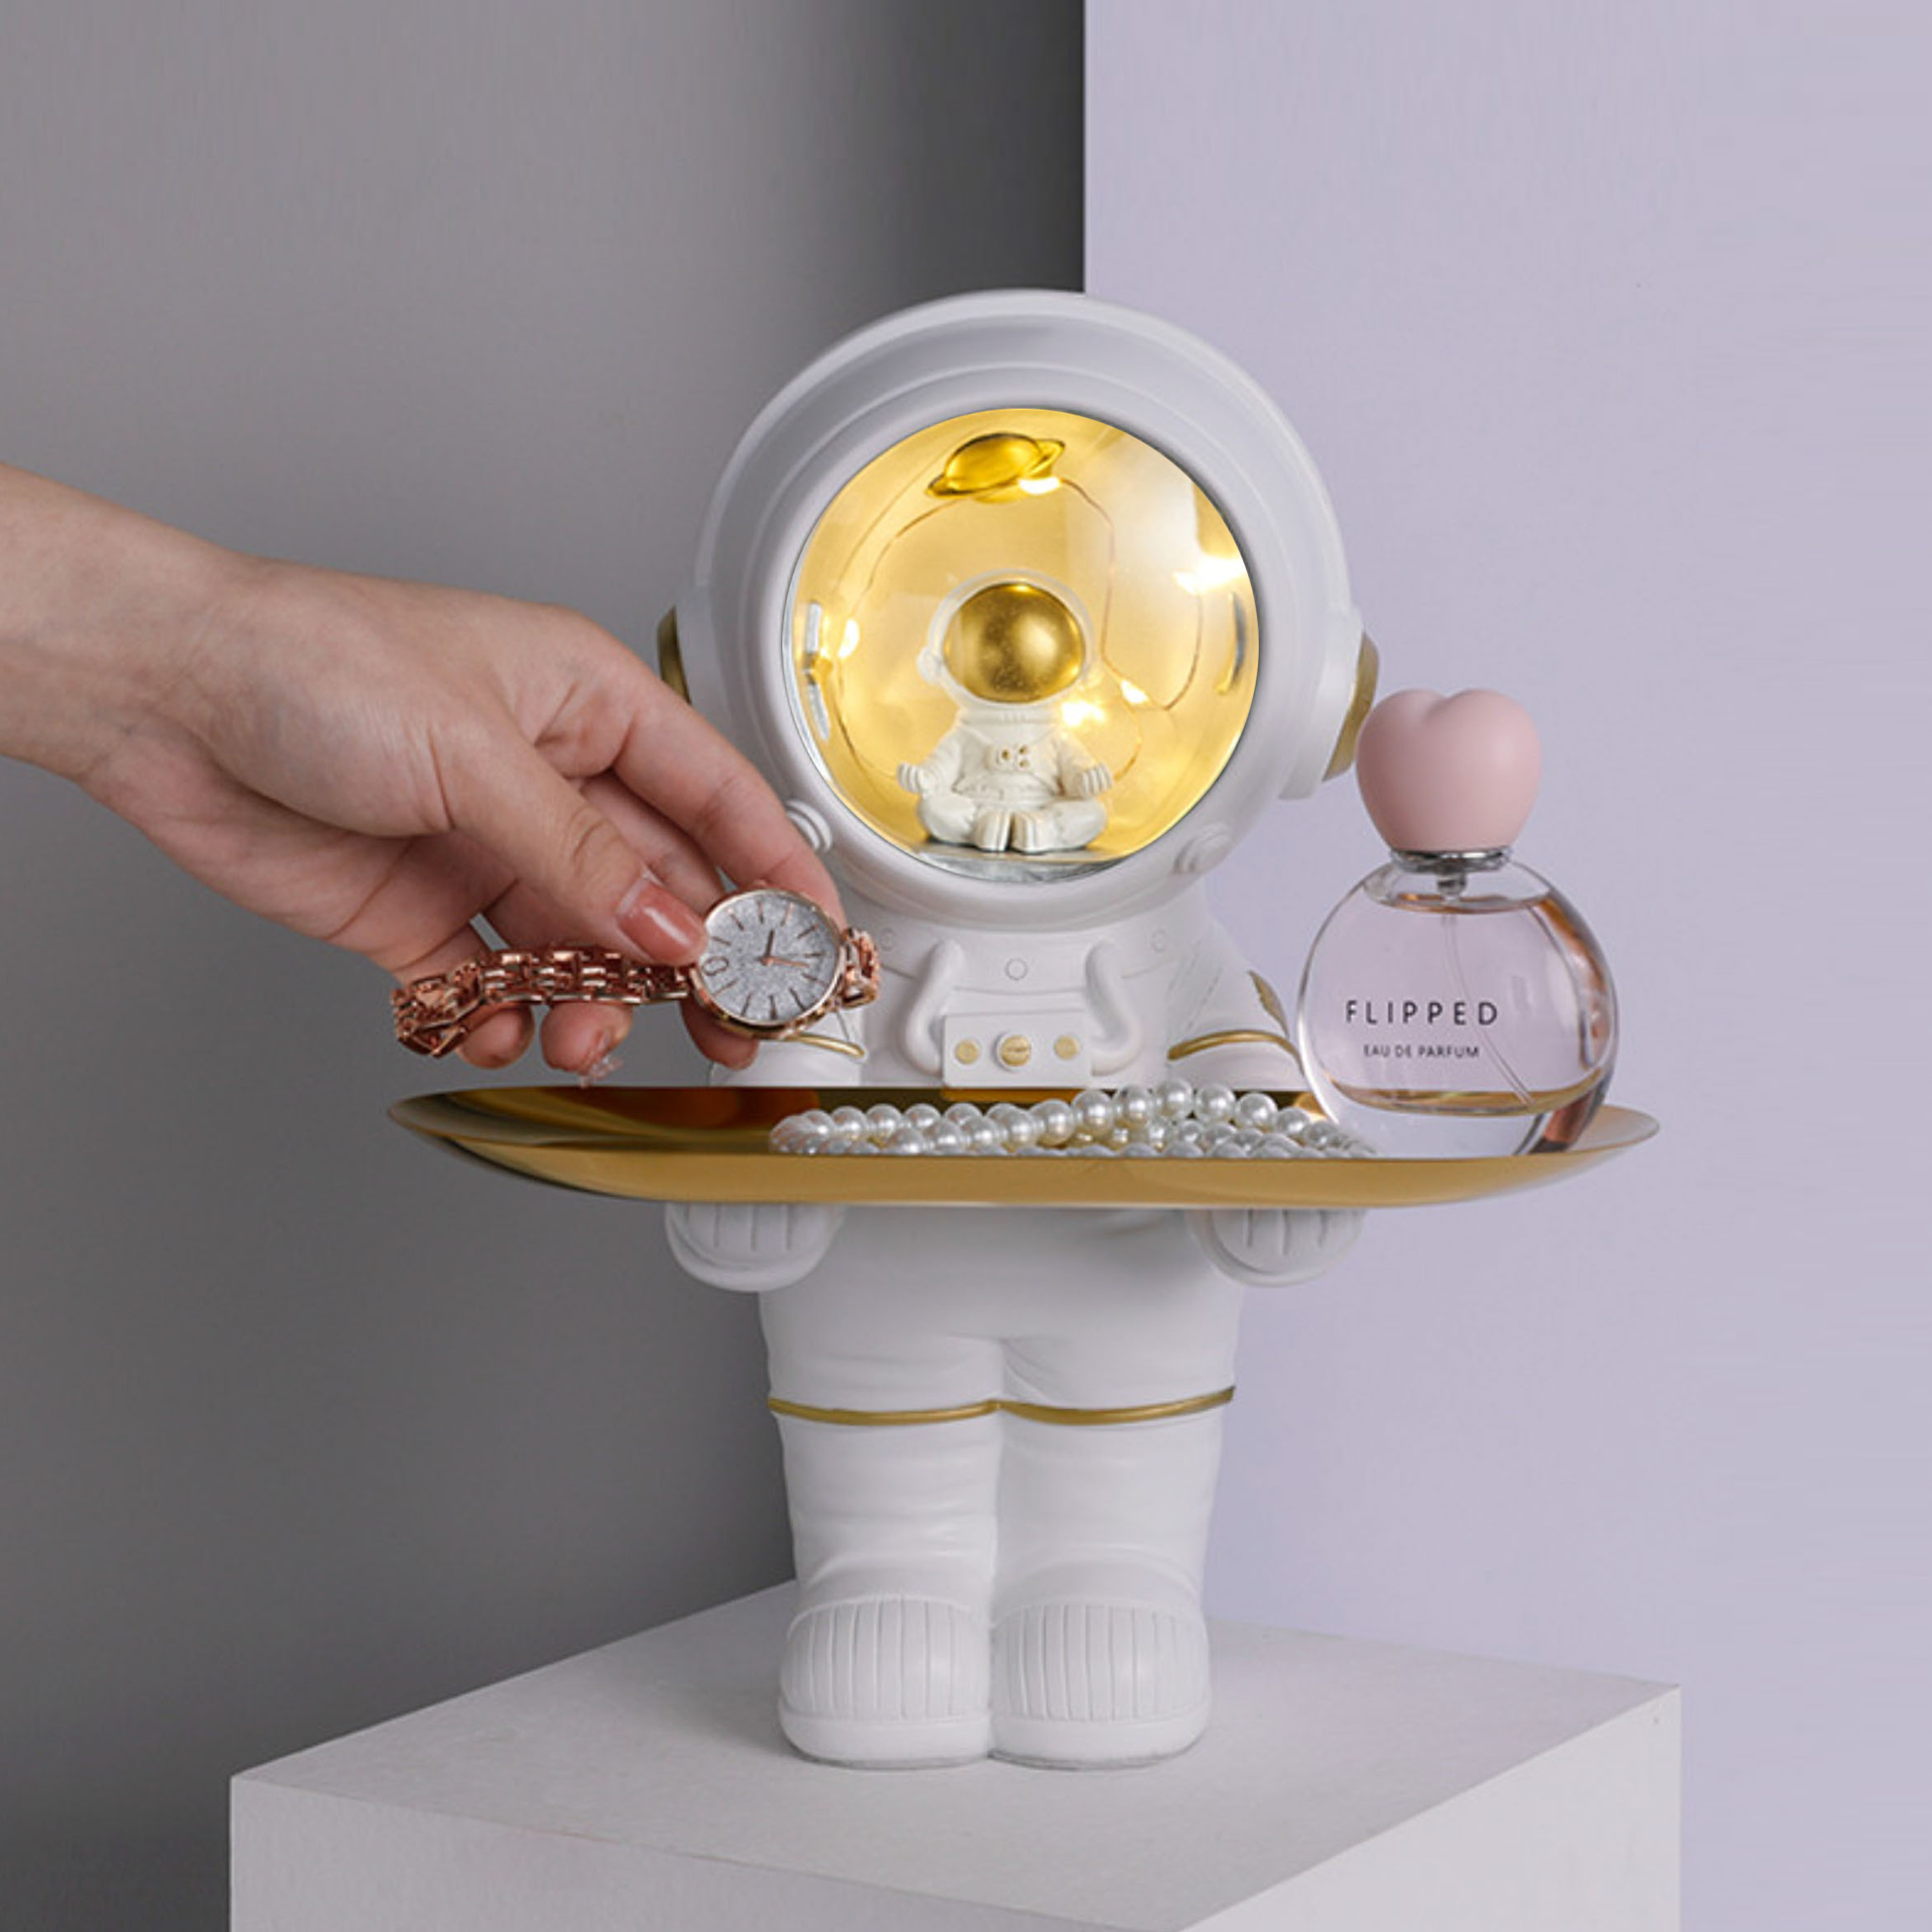 Kids white or grey astronaut, spaceman light with gold tray